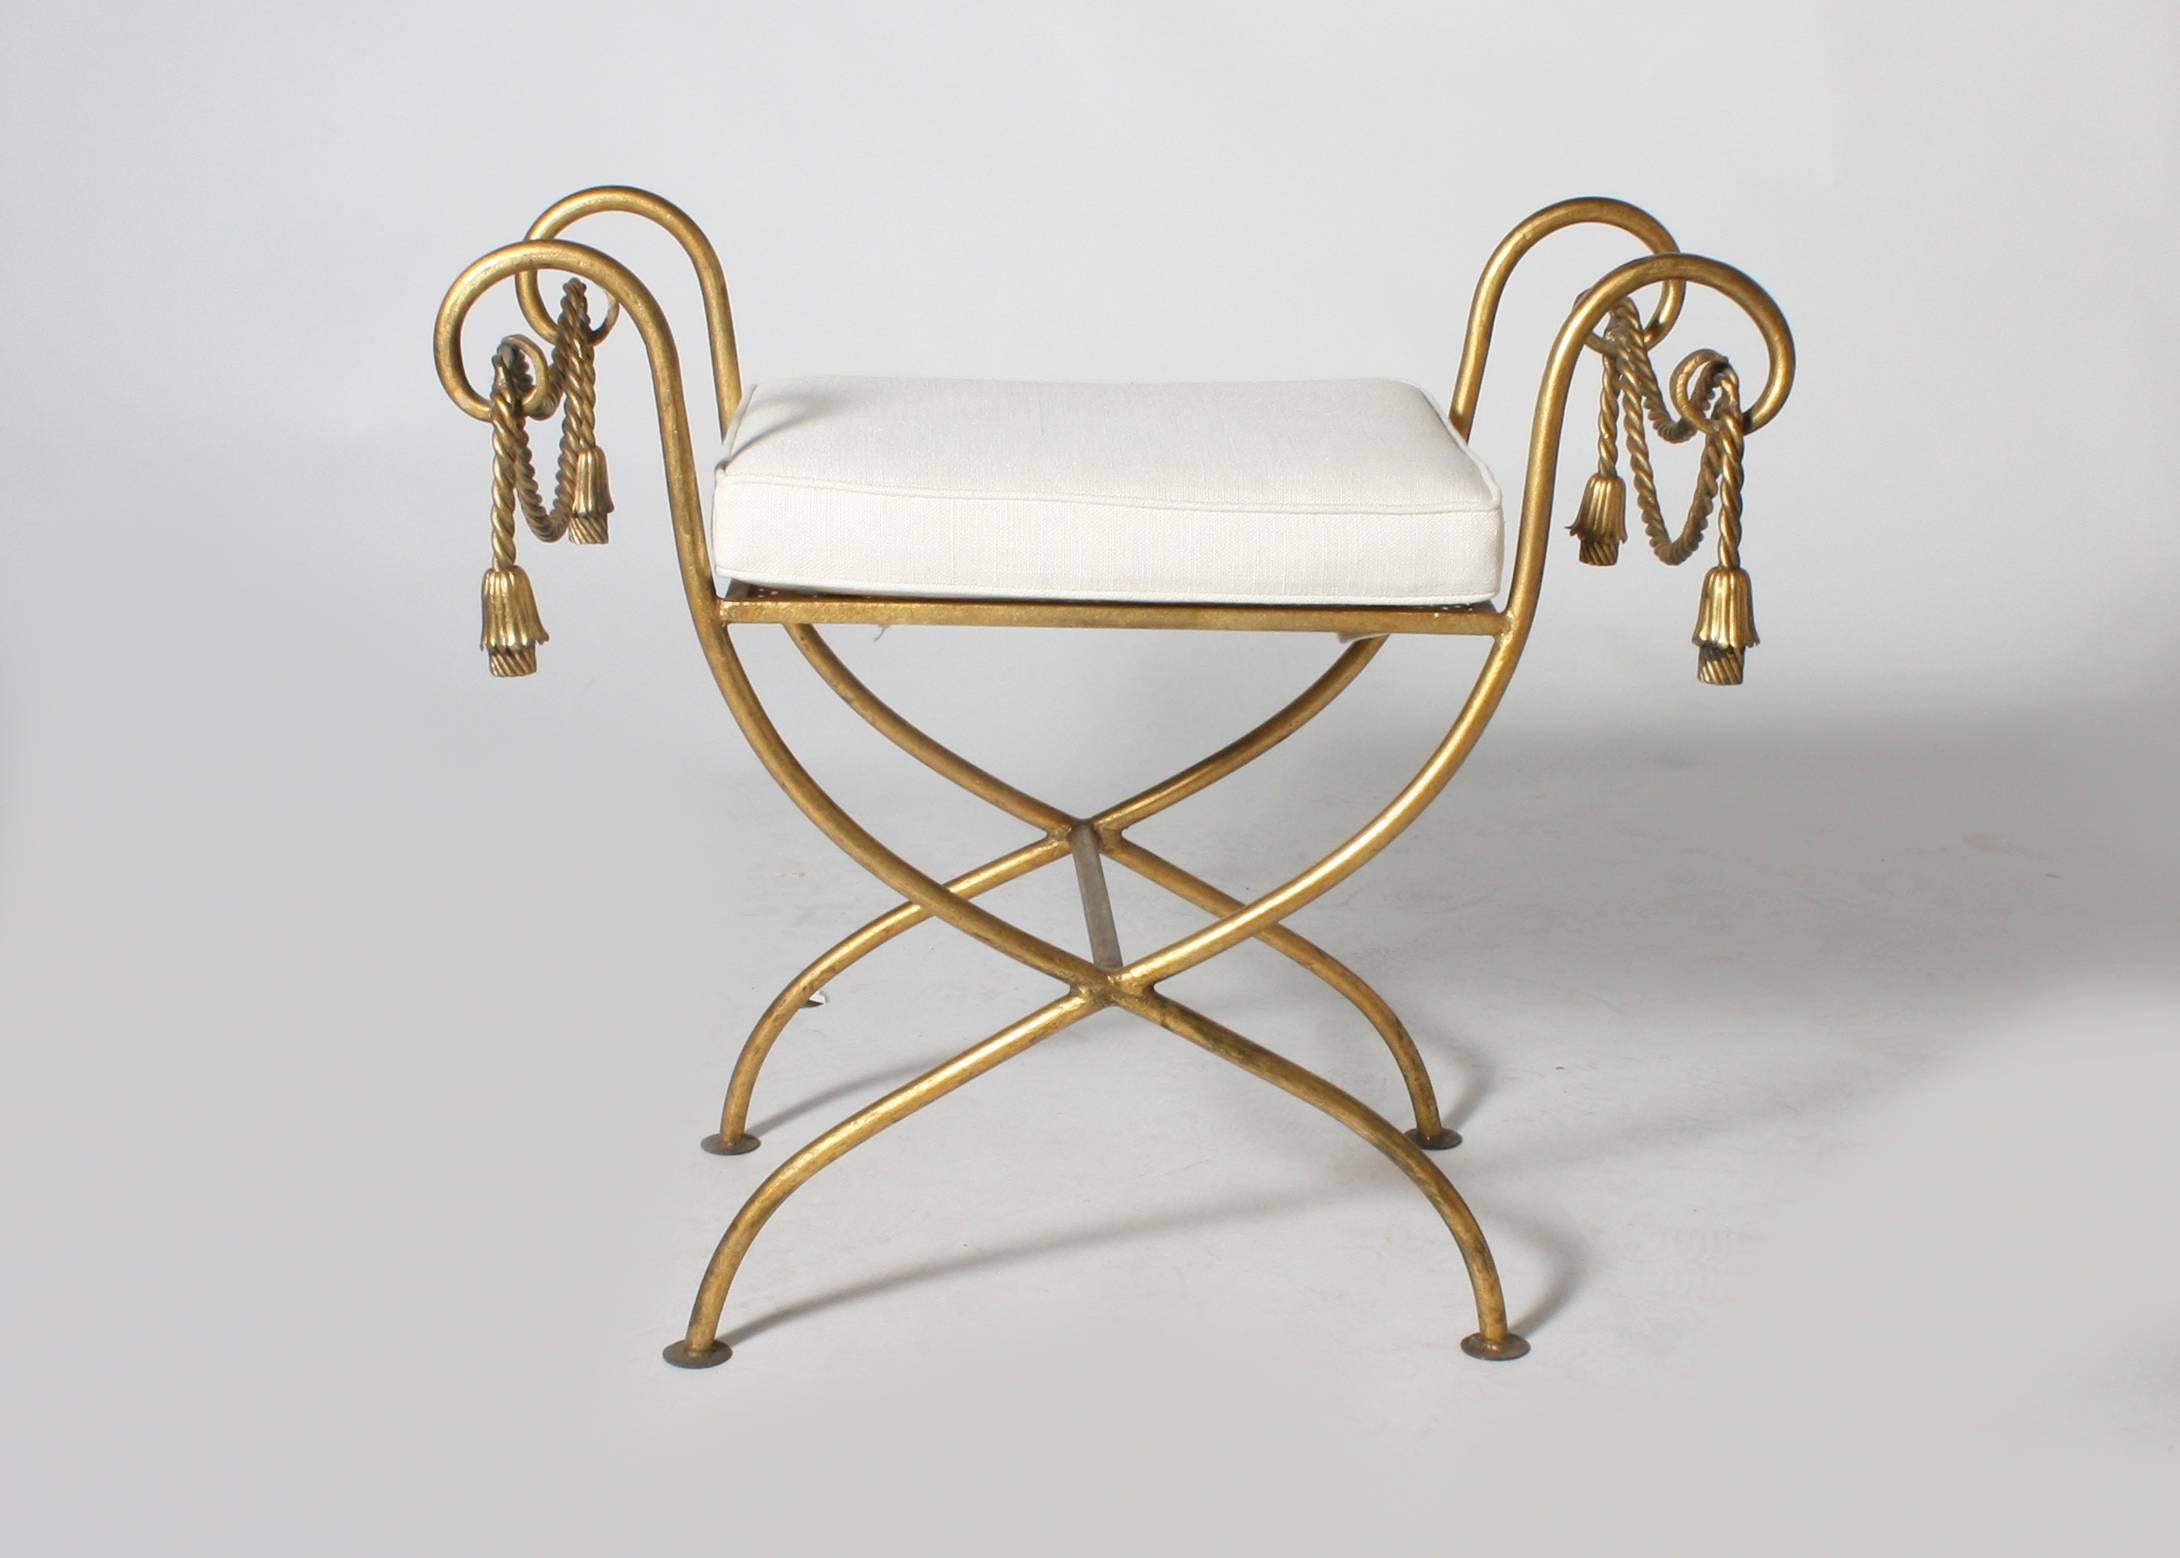 French gilded iron dressing bench with an ivory linen fabric and self welt. The seat was built and upholstered new for this bench.